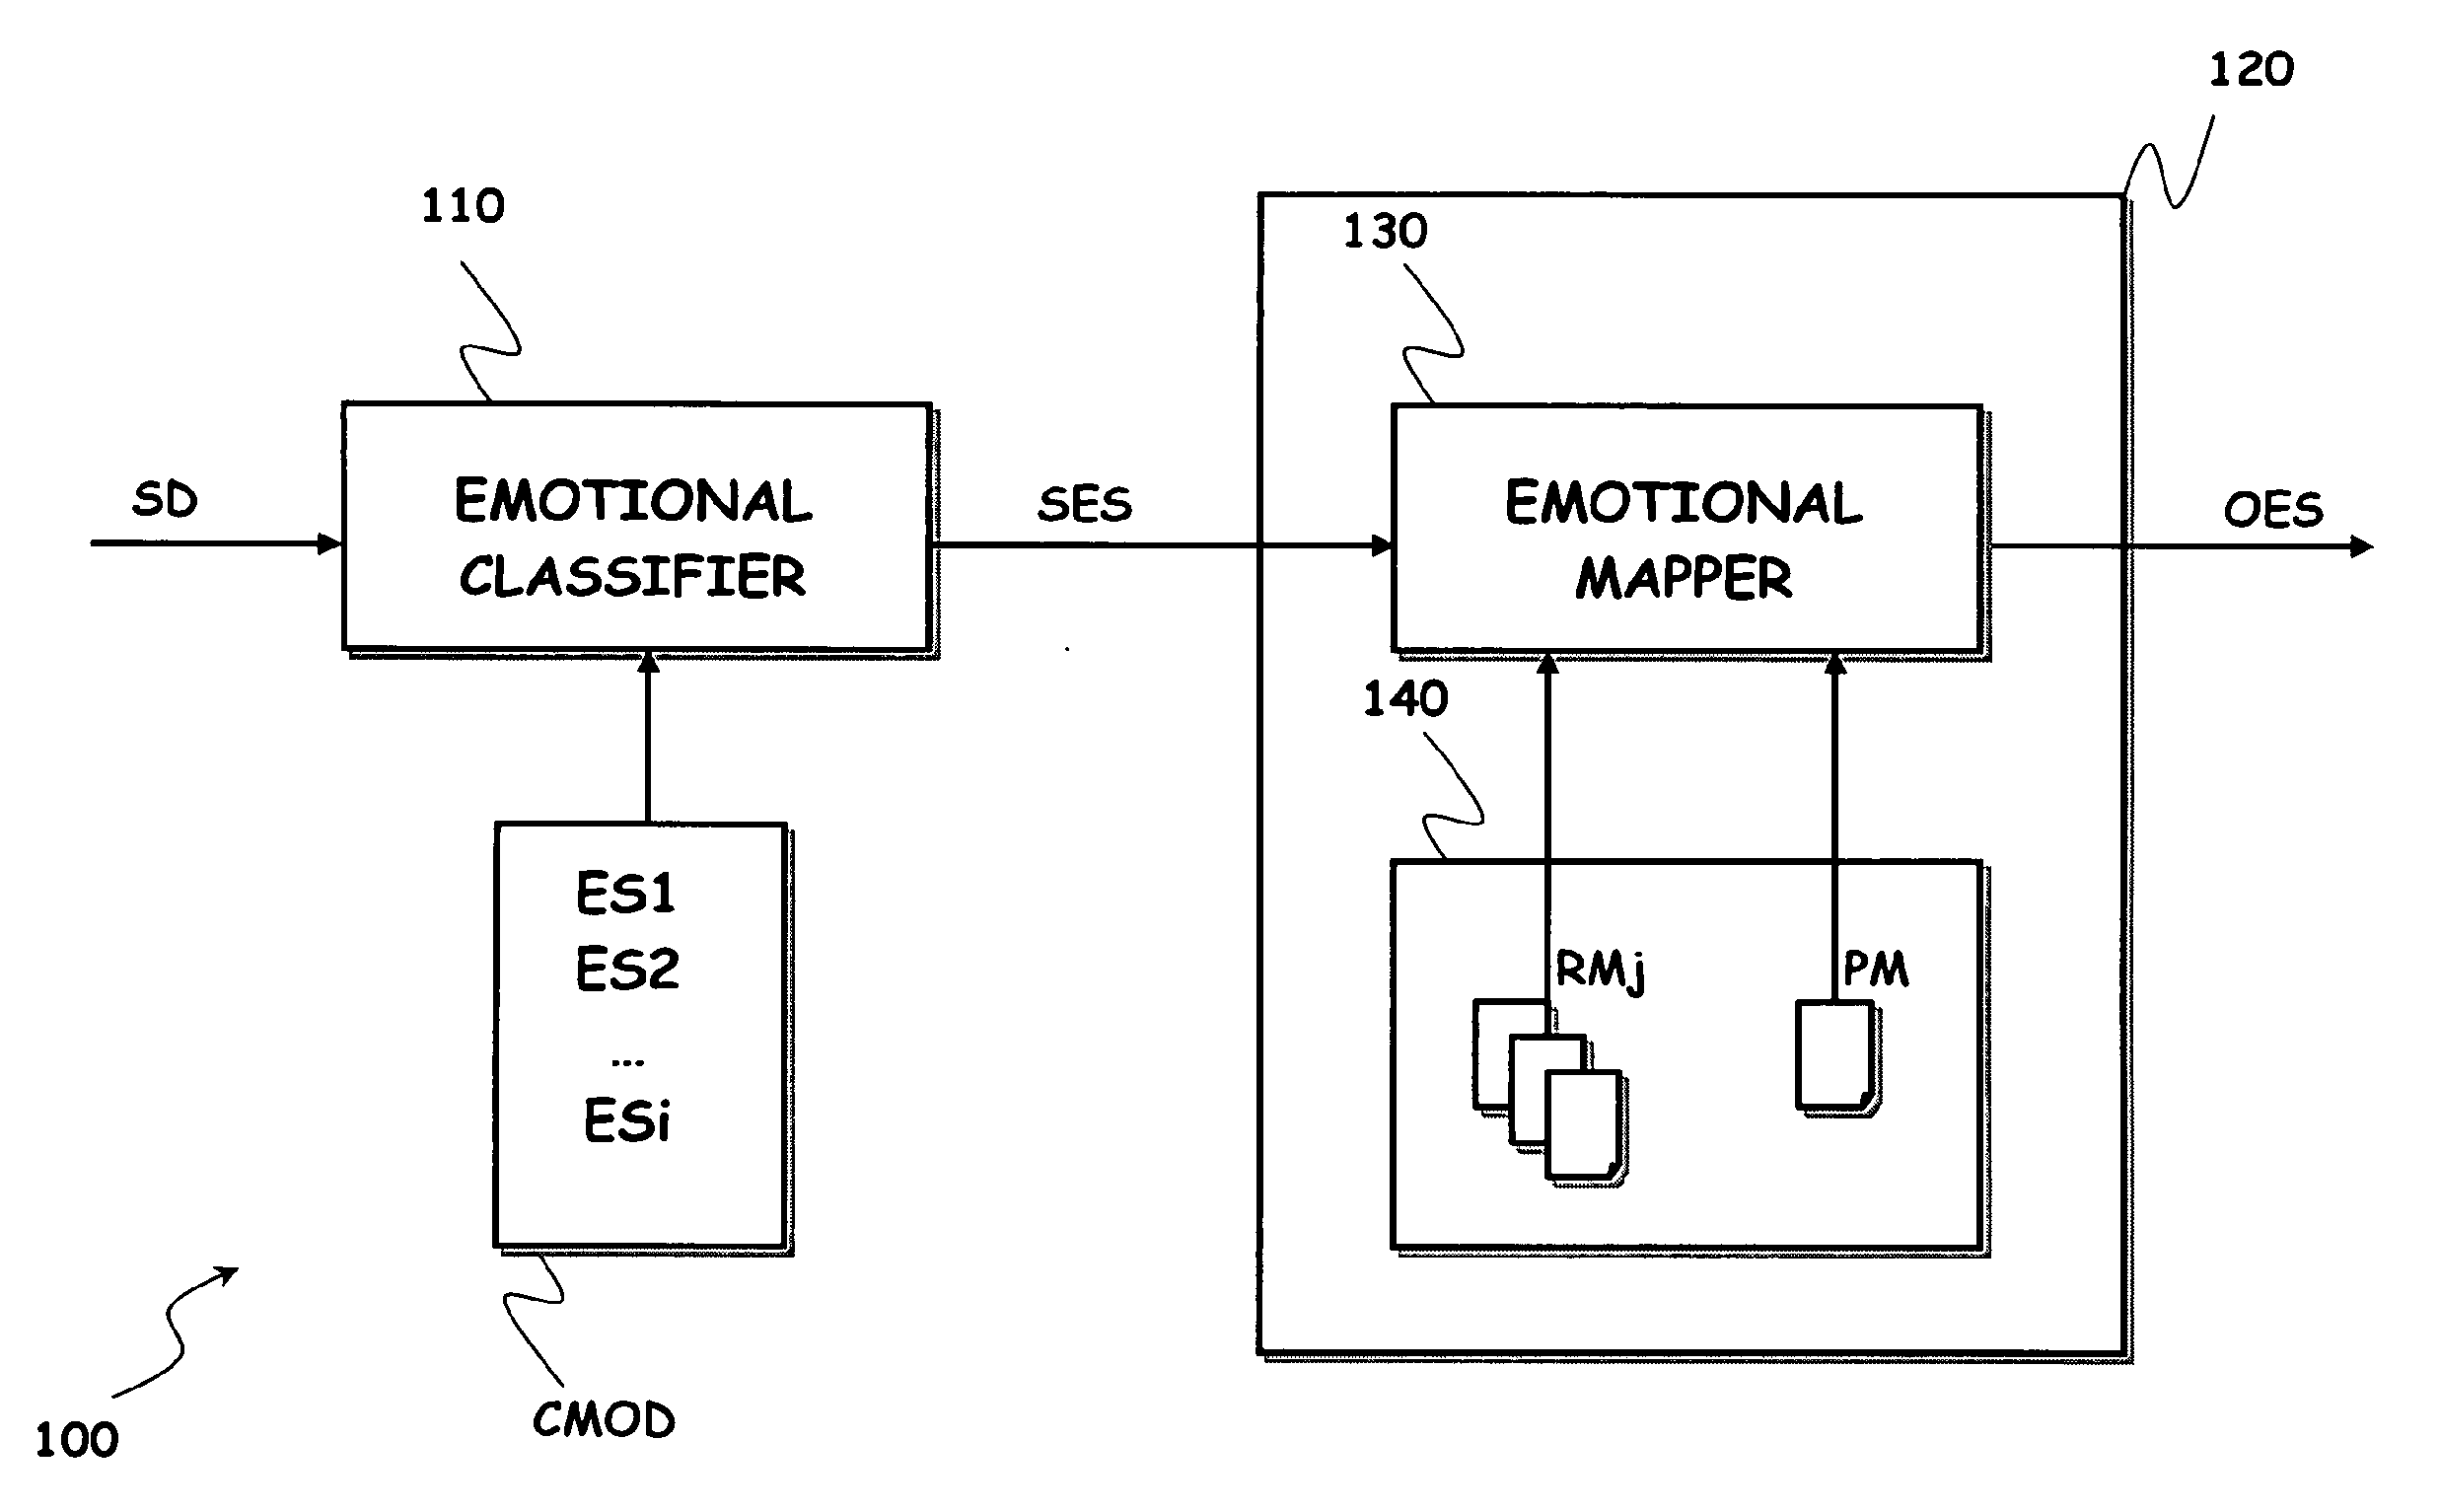 Method and system to improve automated emotional recognition